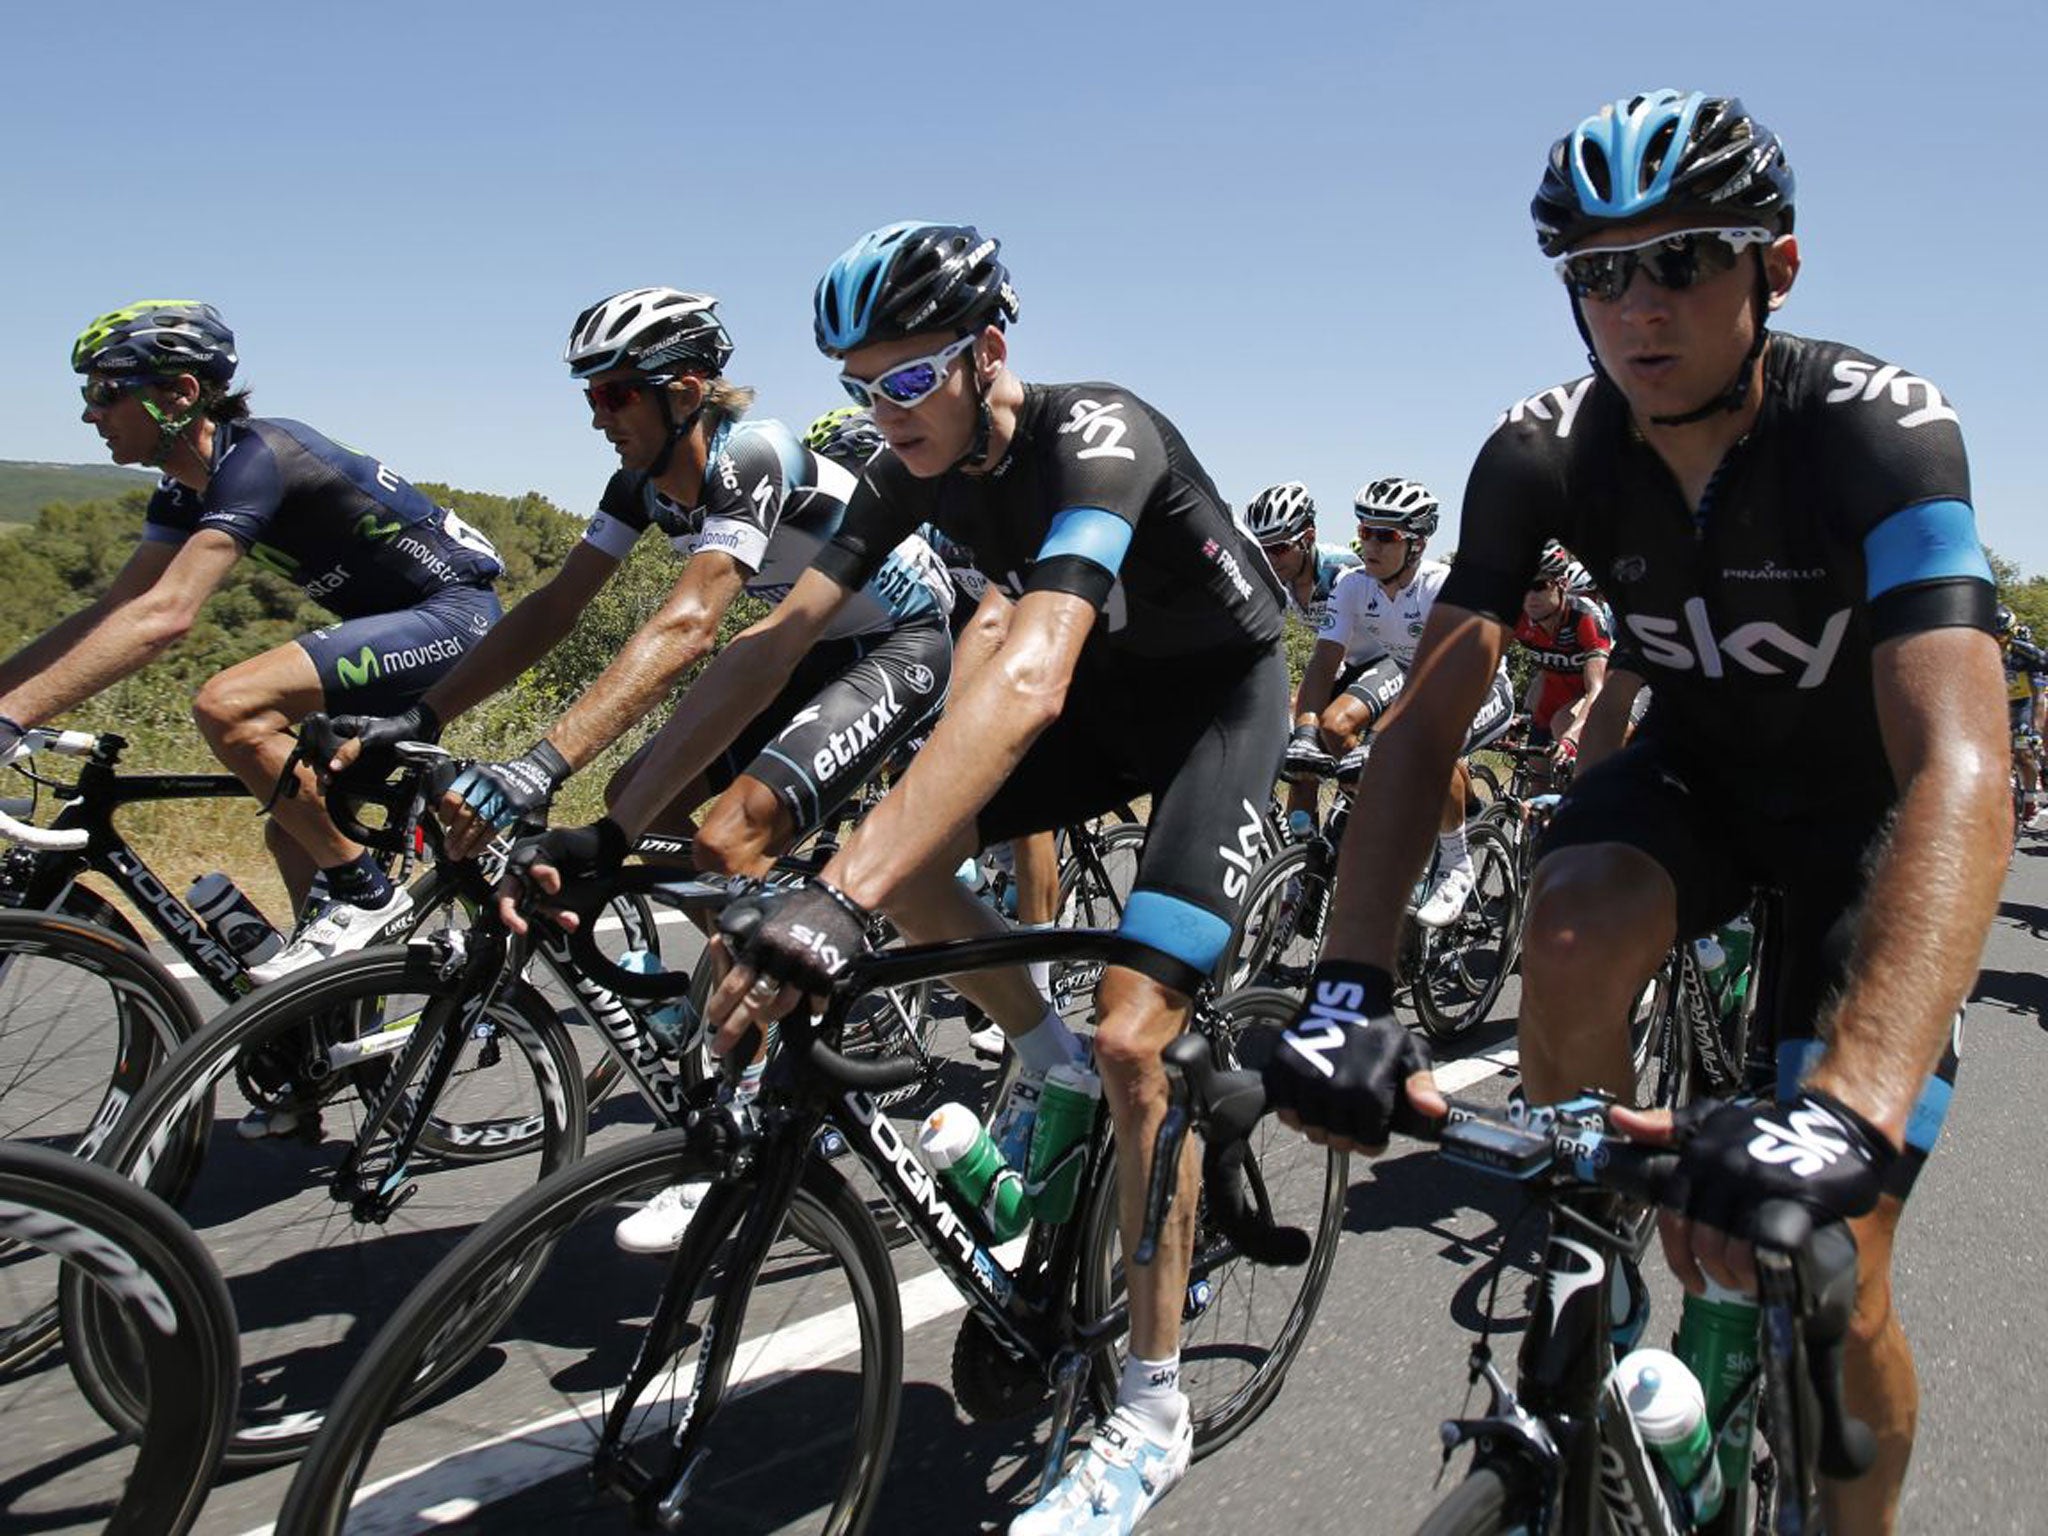 Sky’s Chris Froome (second right) finished back in the pack on Stage 7 yesterday